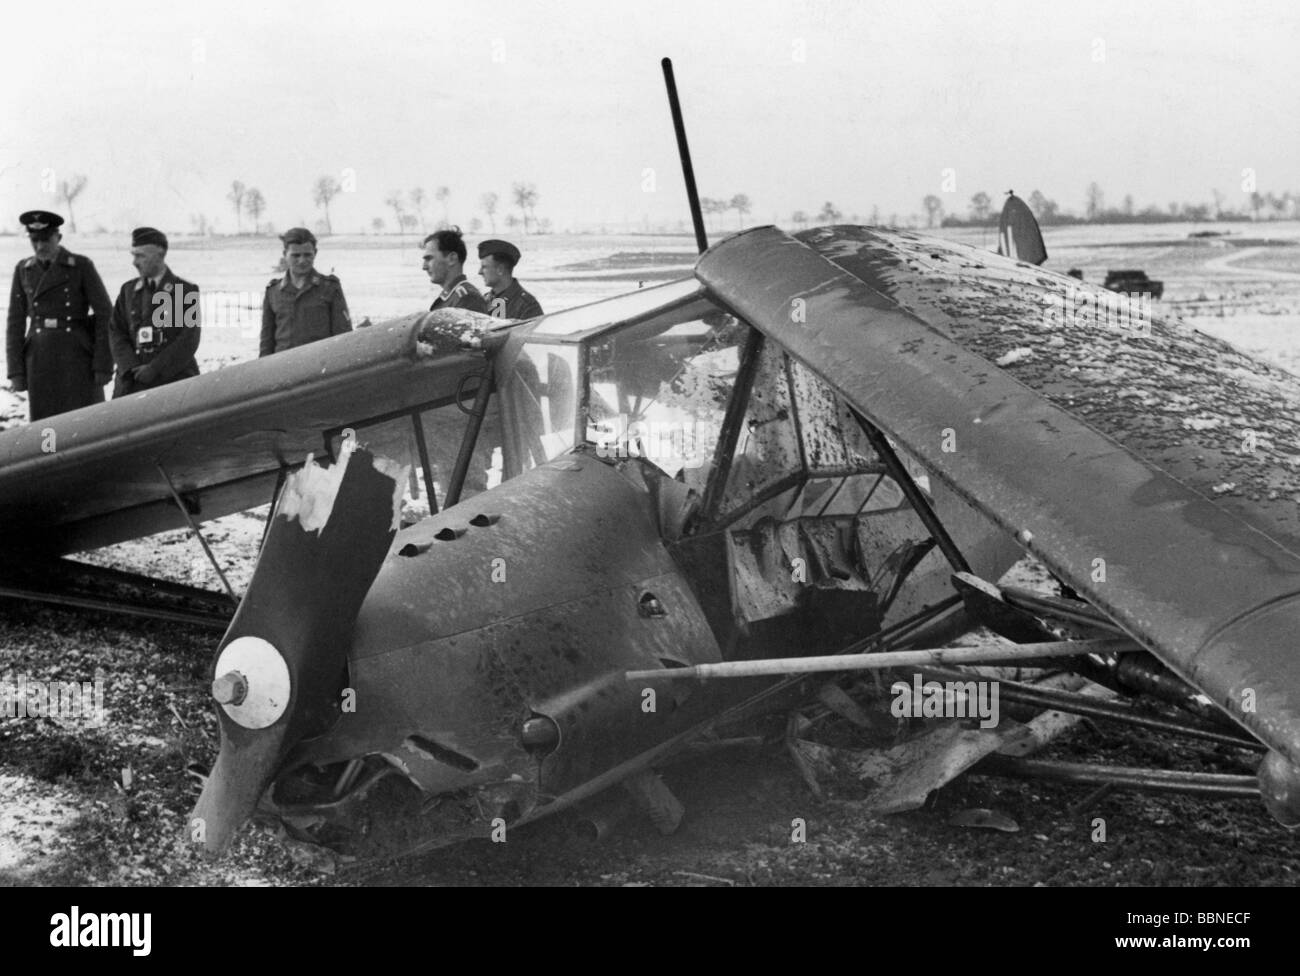 events, Second World War / WWII, aerial warfare, aircraft, crashed / damaged, German liaison aircraft Fieseler Fi 156 'Storch' (Stork), crashed on 23.2.1941 near Amiens, France, Stock Photo